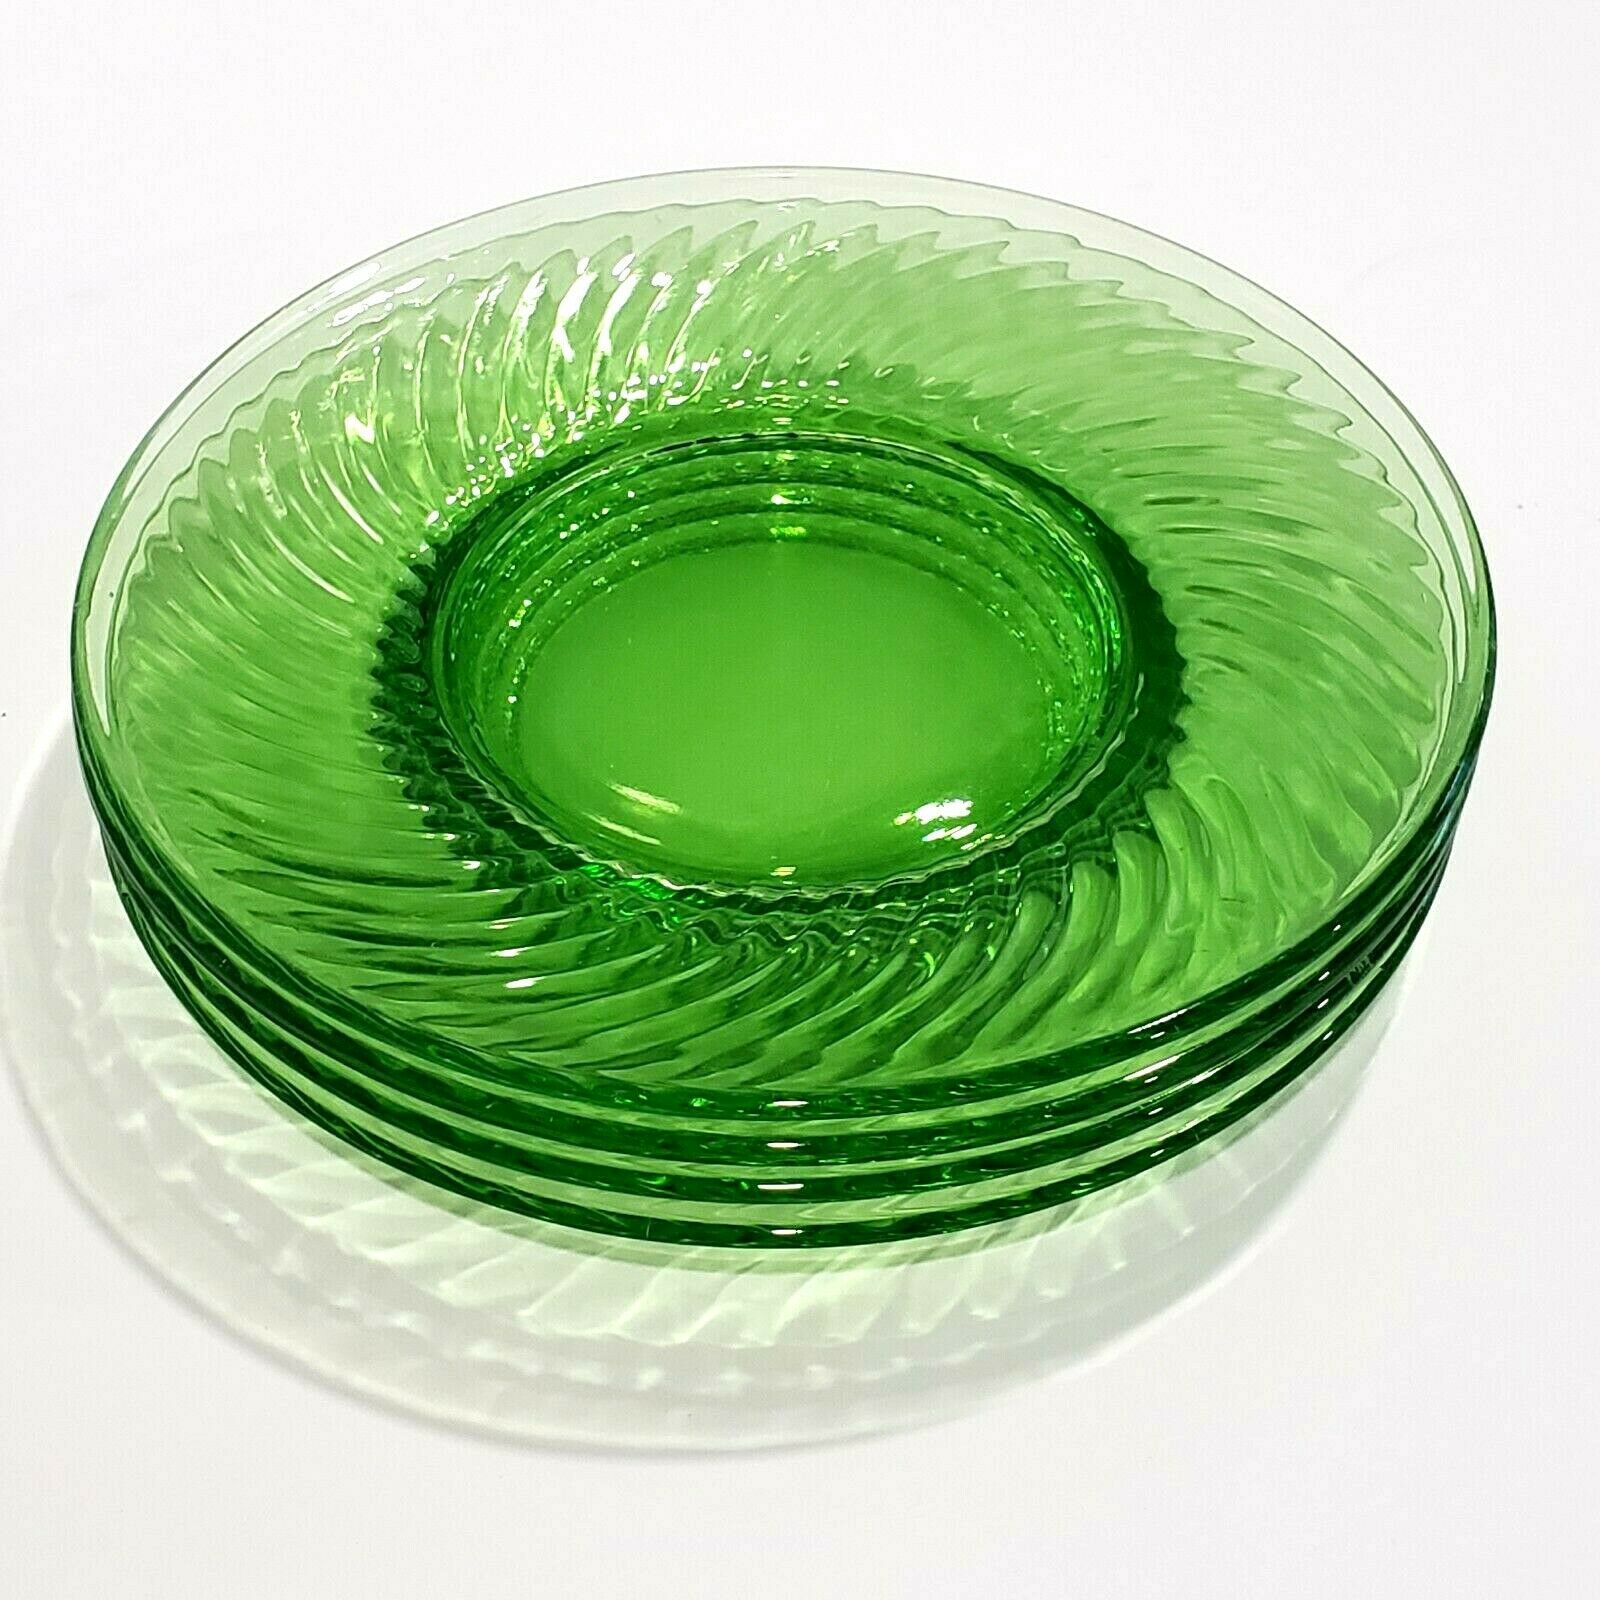 Spiral 1928-30 Set Of 4 Green Plates 8 1/4” By Hocking Glass Co Vintage